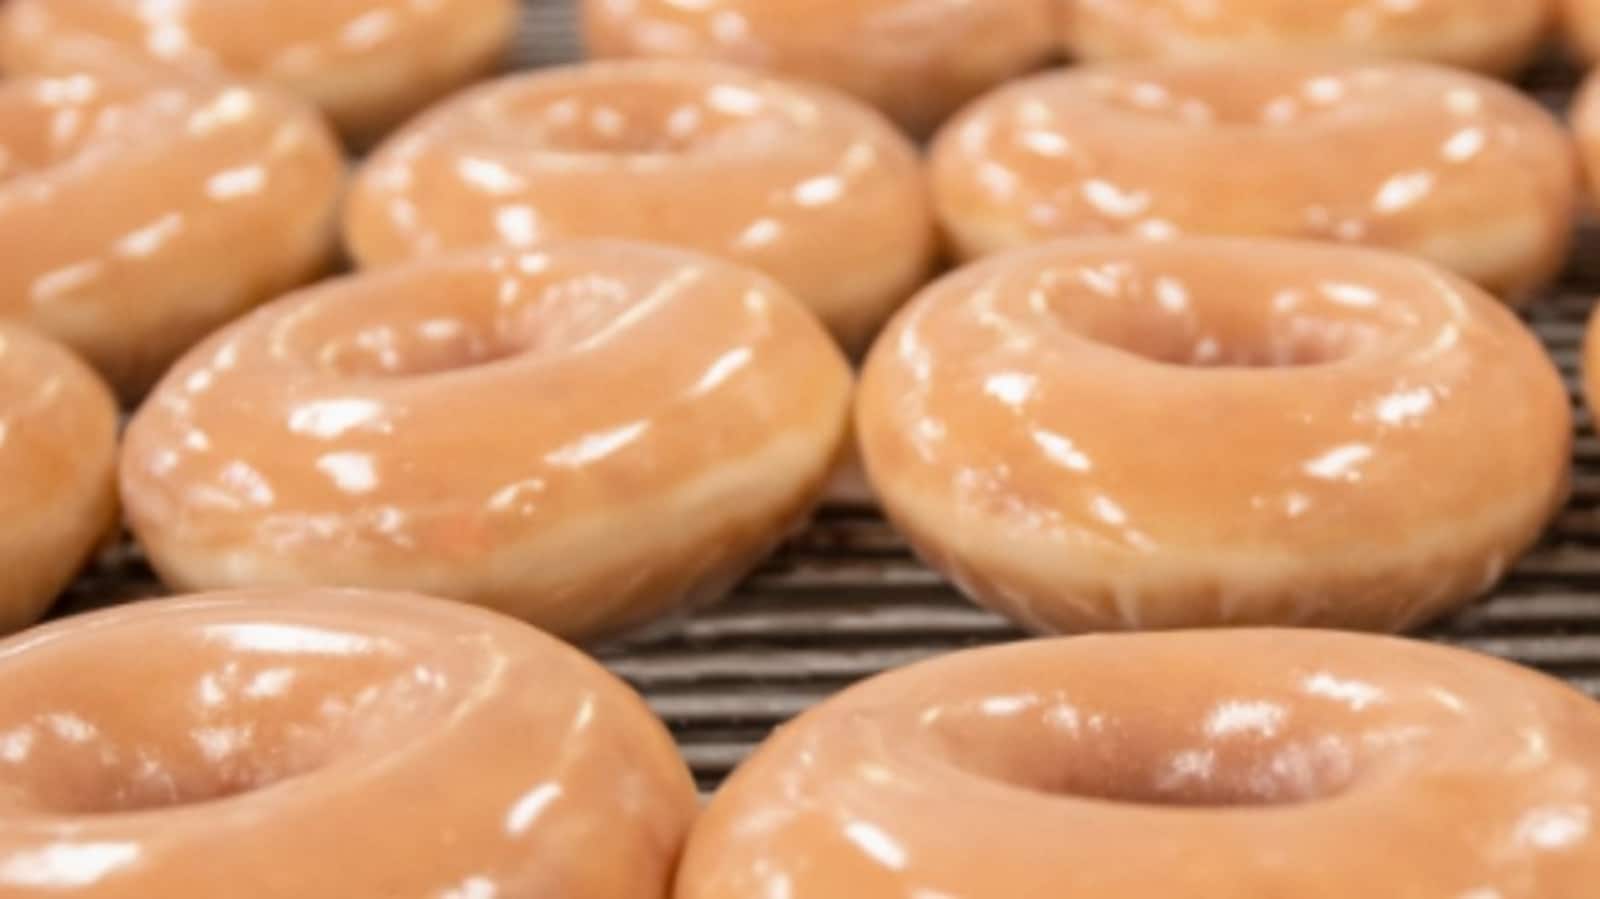 Krispy Kreme is offering ‘free donuts’ on World Kindness Day, the offer reads…